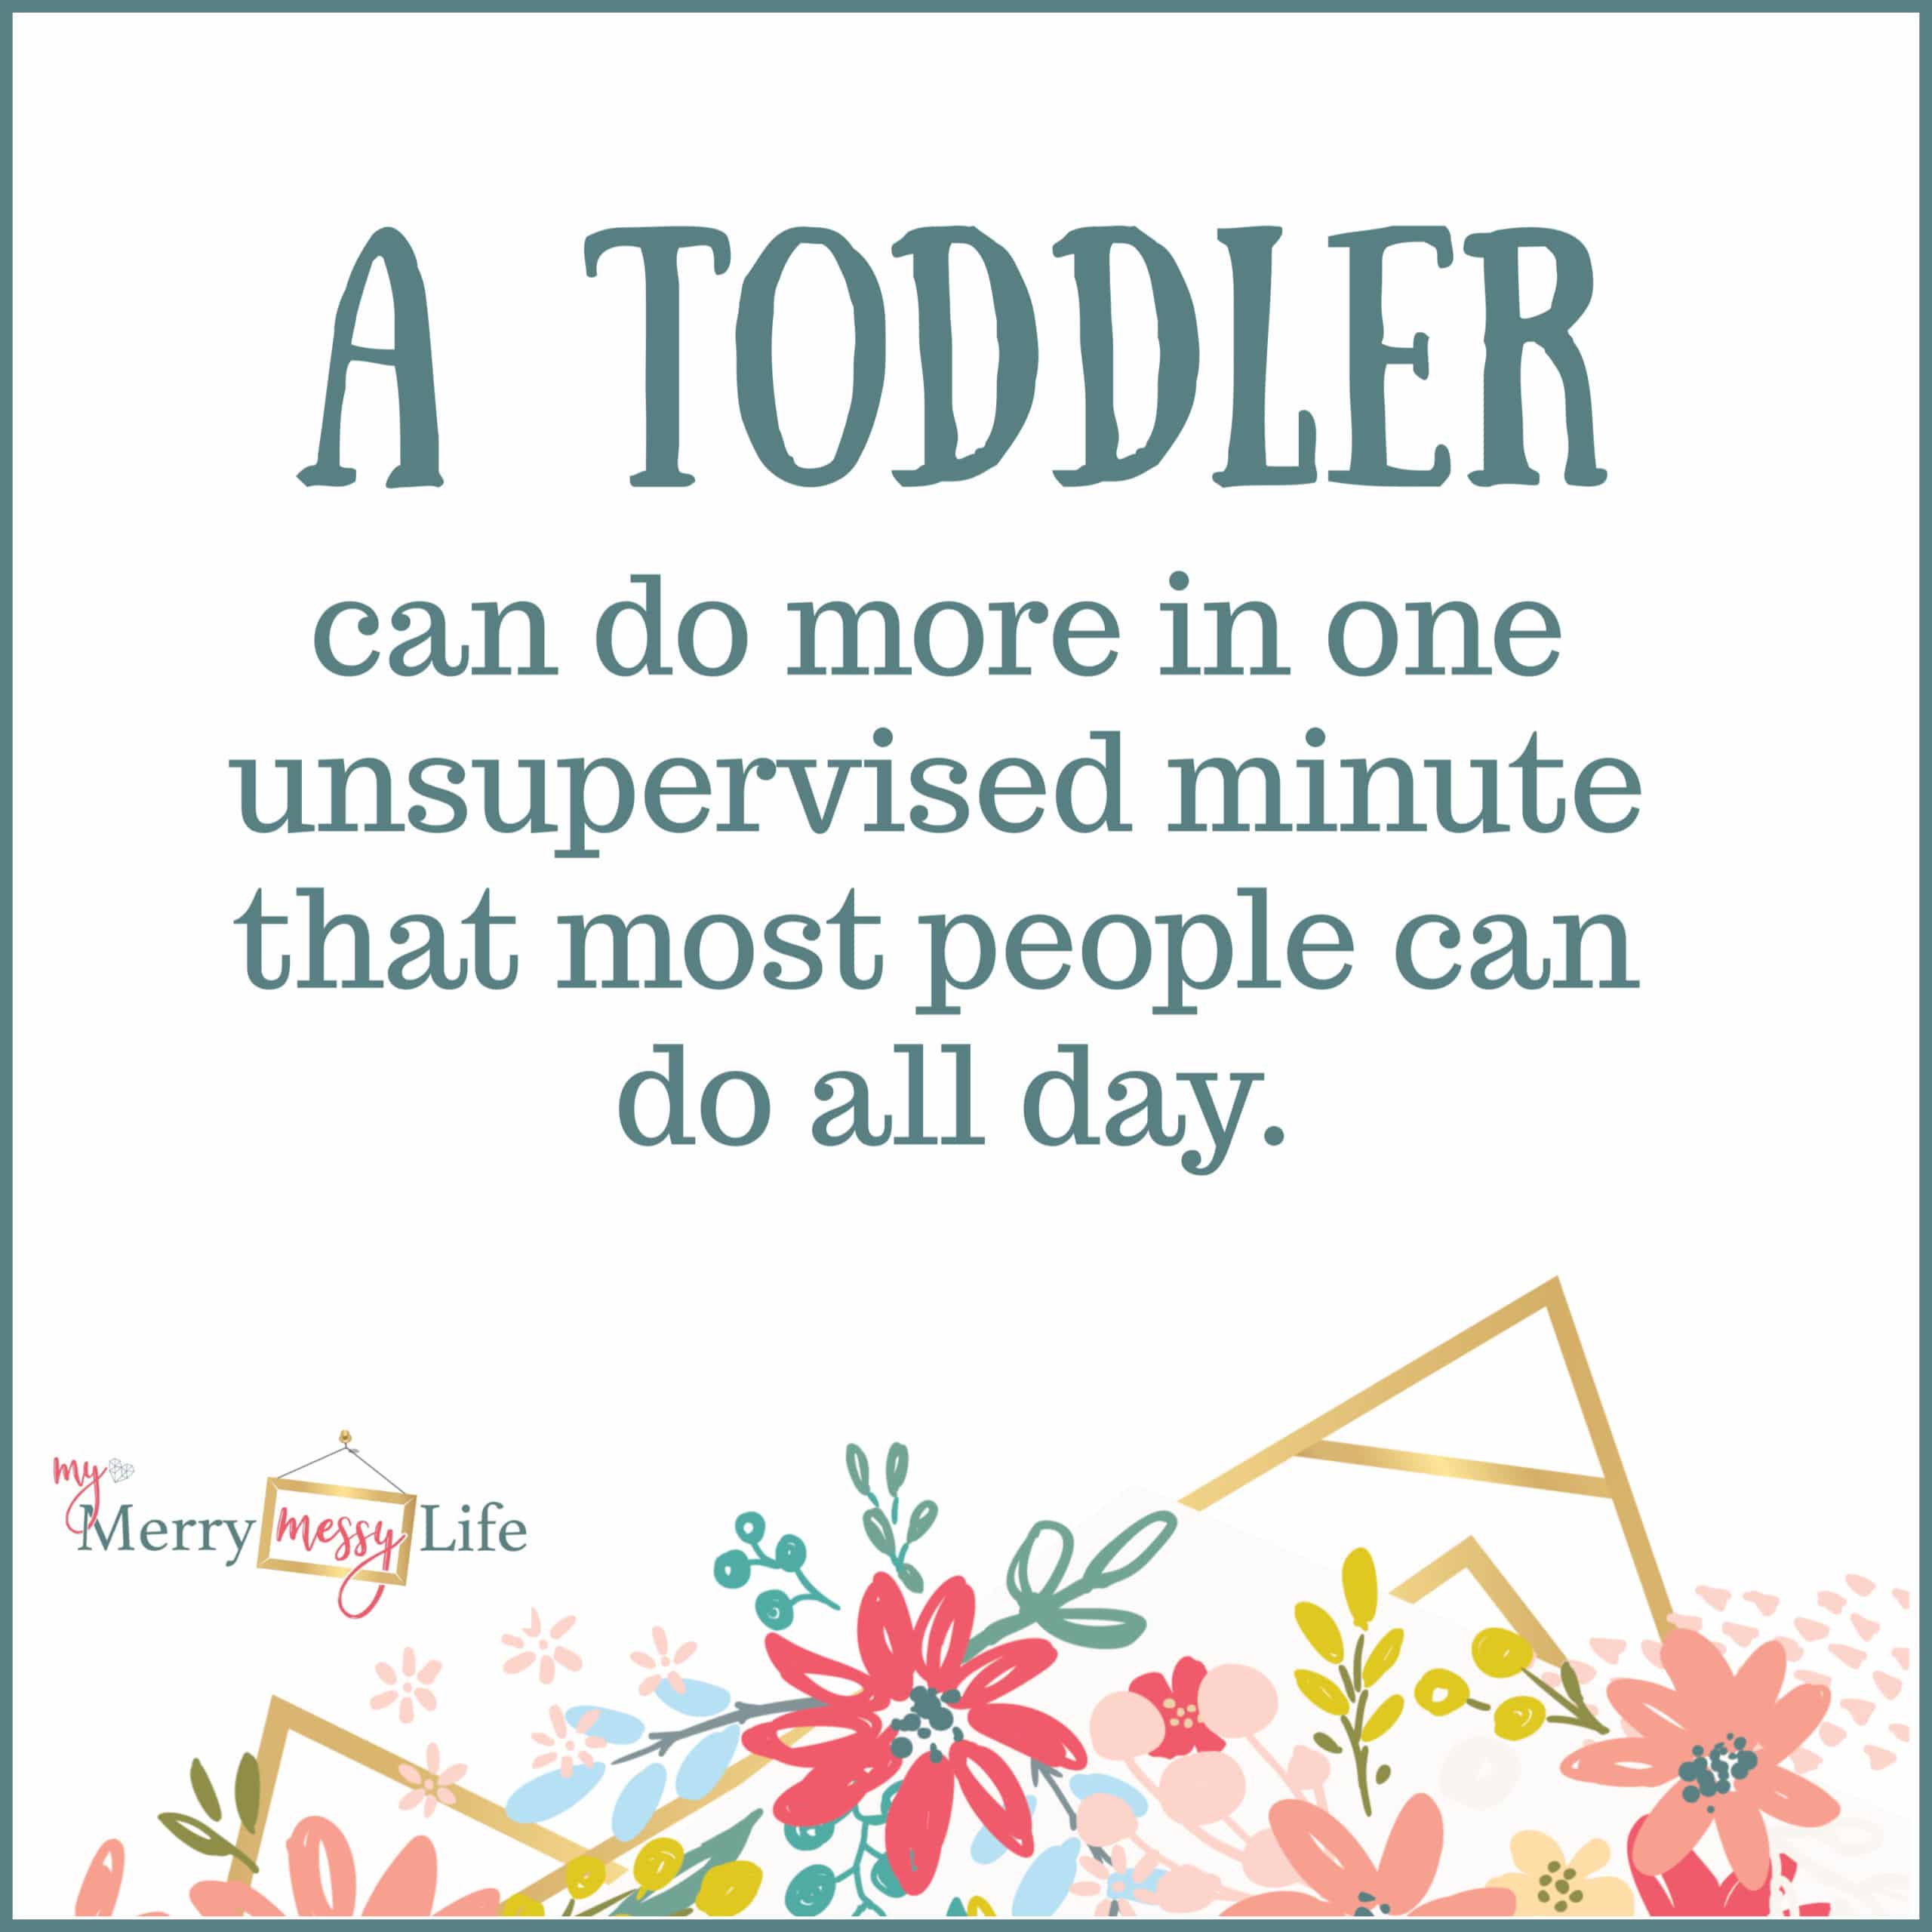 A toddler can do more in one unsupervised minuted than most people can do all day!